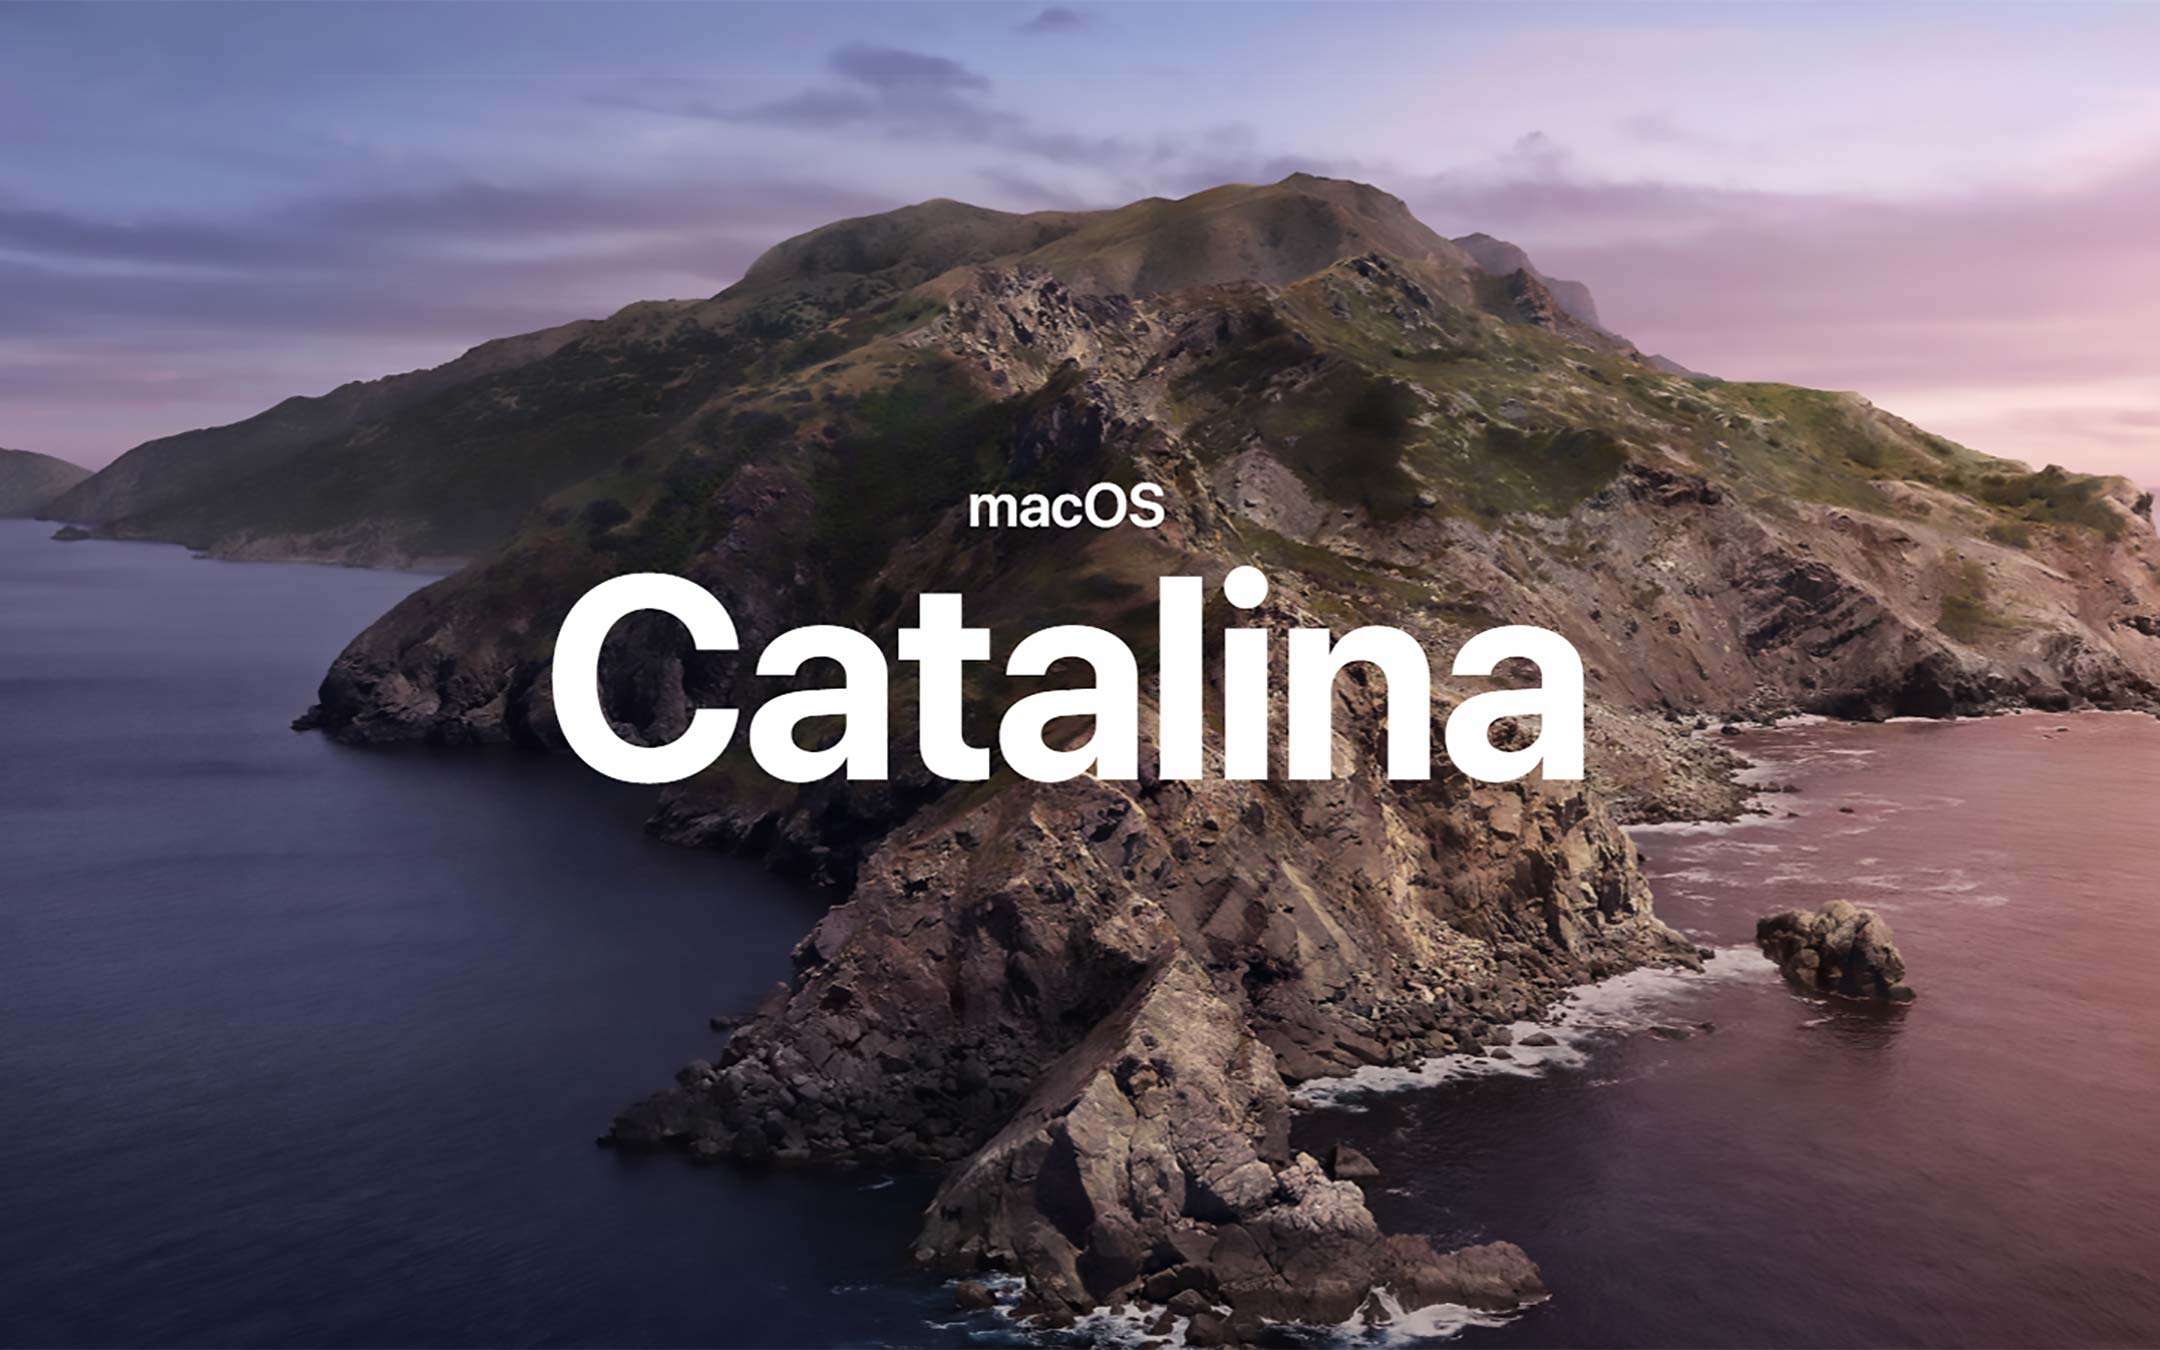 Waiting for Big Sur, here is macOS Catalina 10.15.7